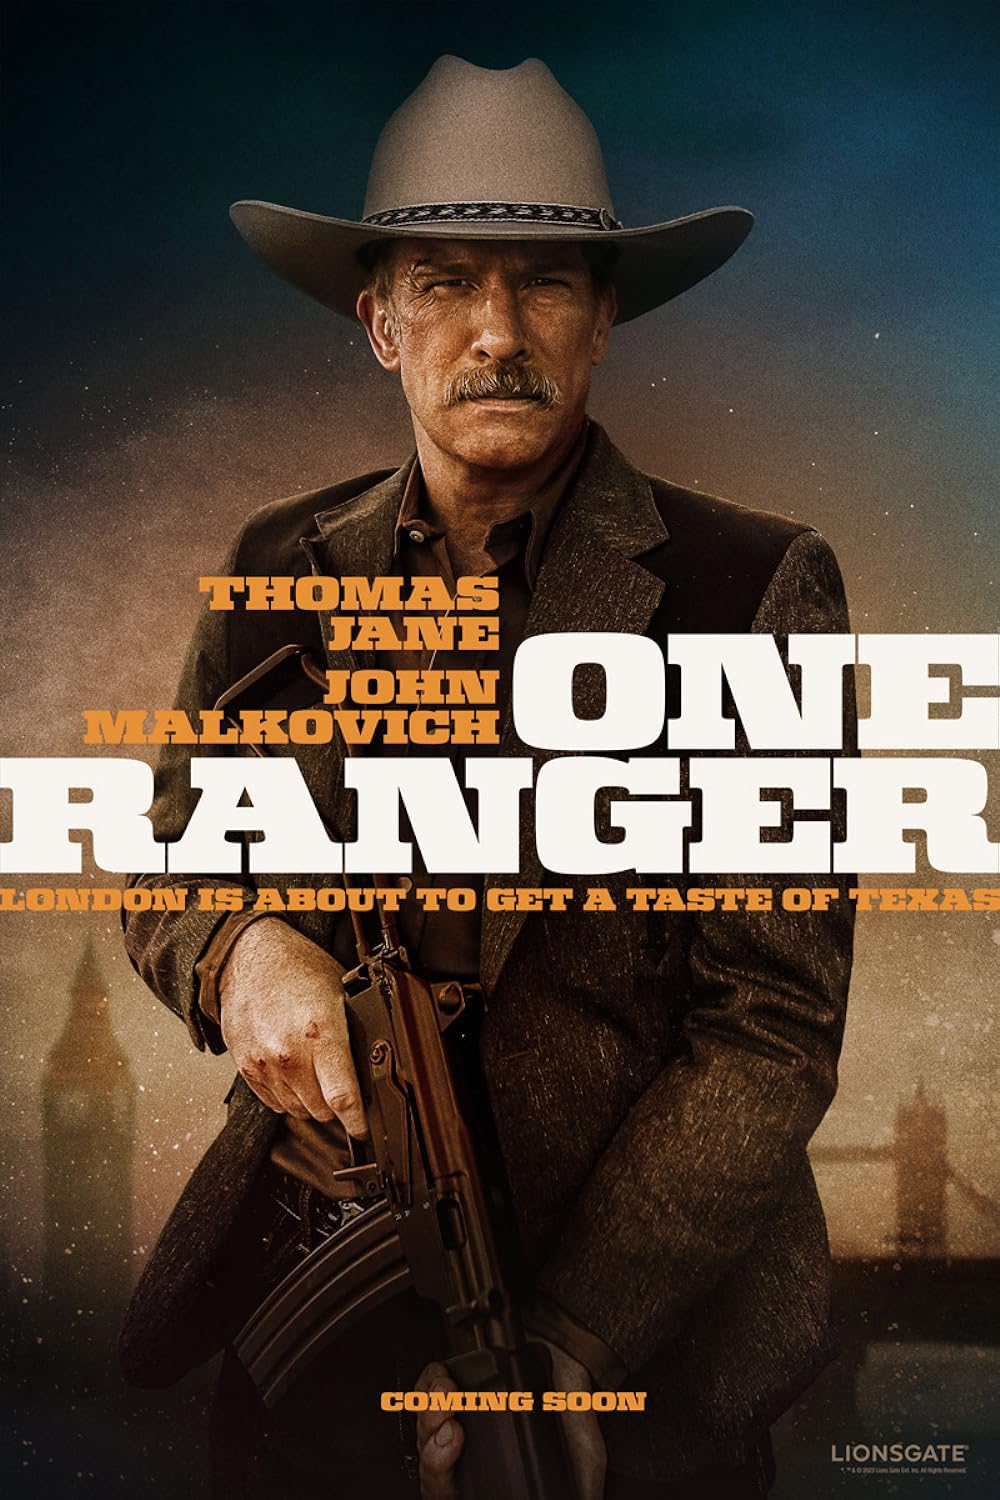 One Ranger (Febuary 2) - Streaming on Lionsgate playOne Ranger is a thriller that blurs the lines between Texas grit and British sophistication. Recruited by British intelligence, the charismatic Texas Ranger, played by the intense Josh Holloway finds himself thrust into the heart of a pulse-pounding mission.